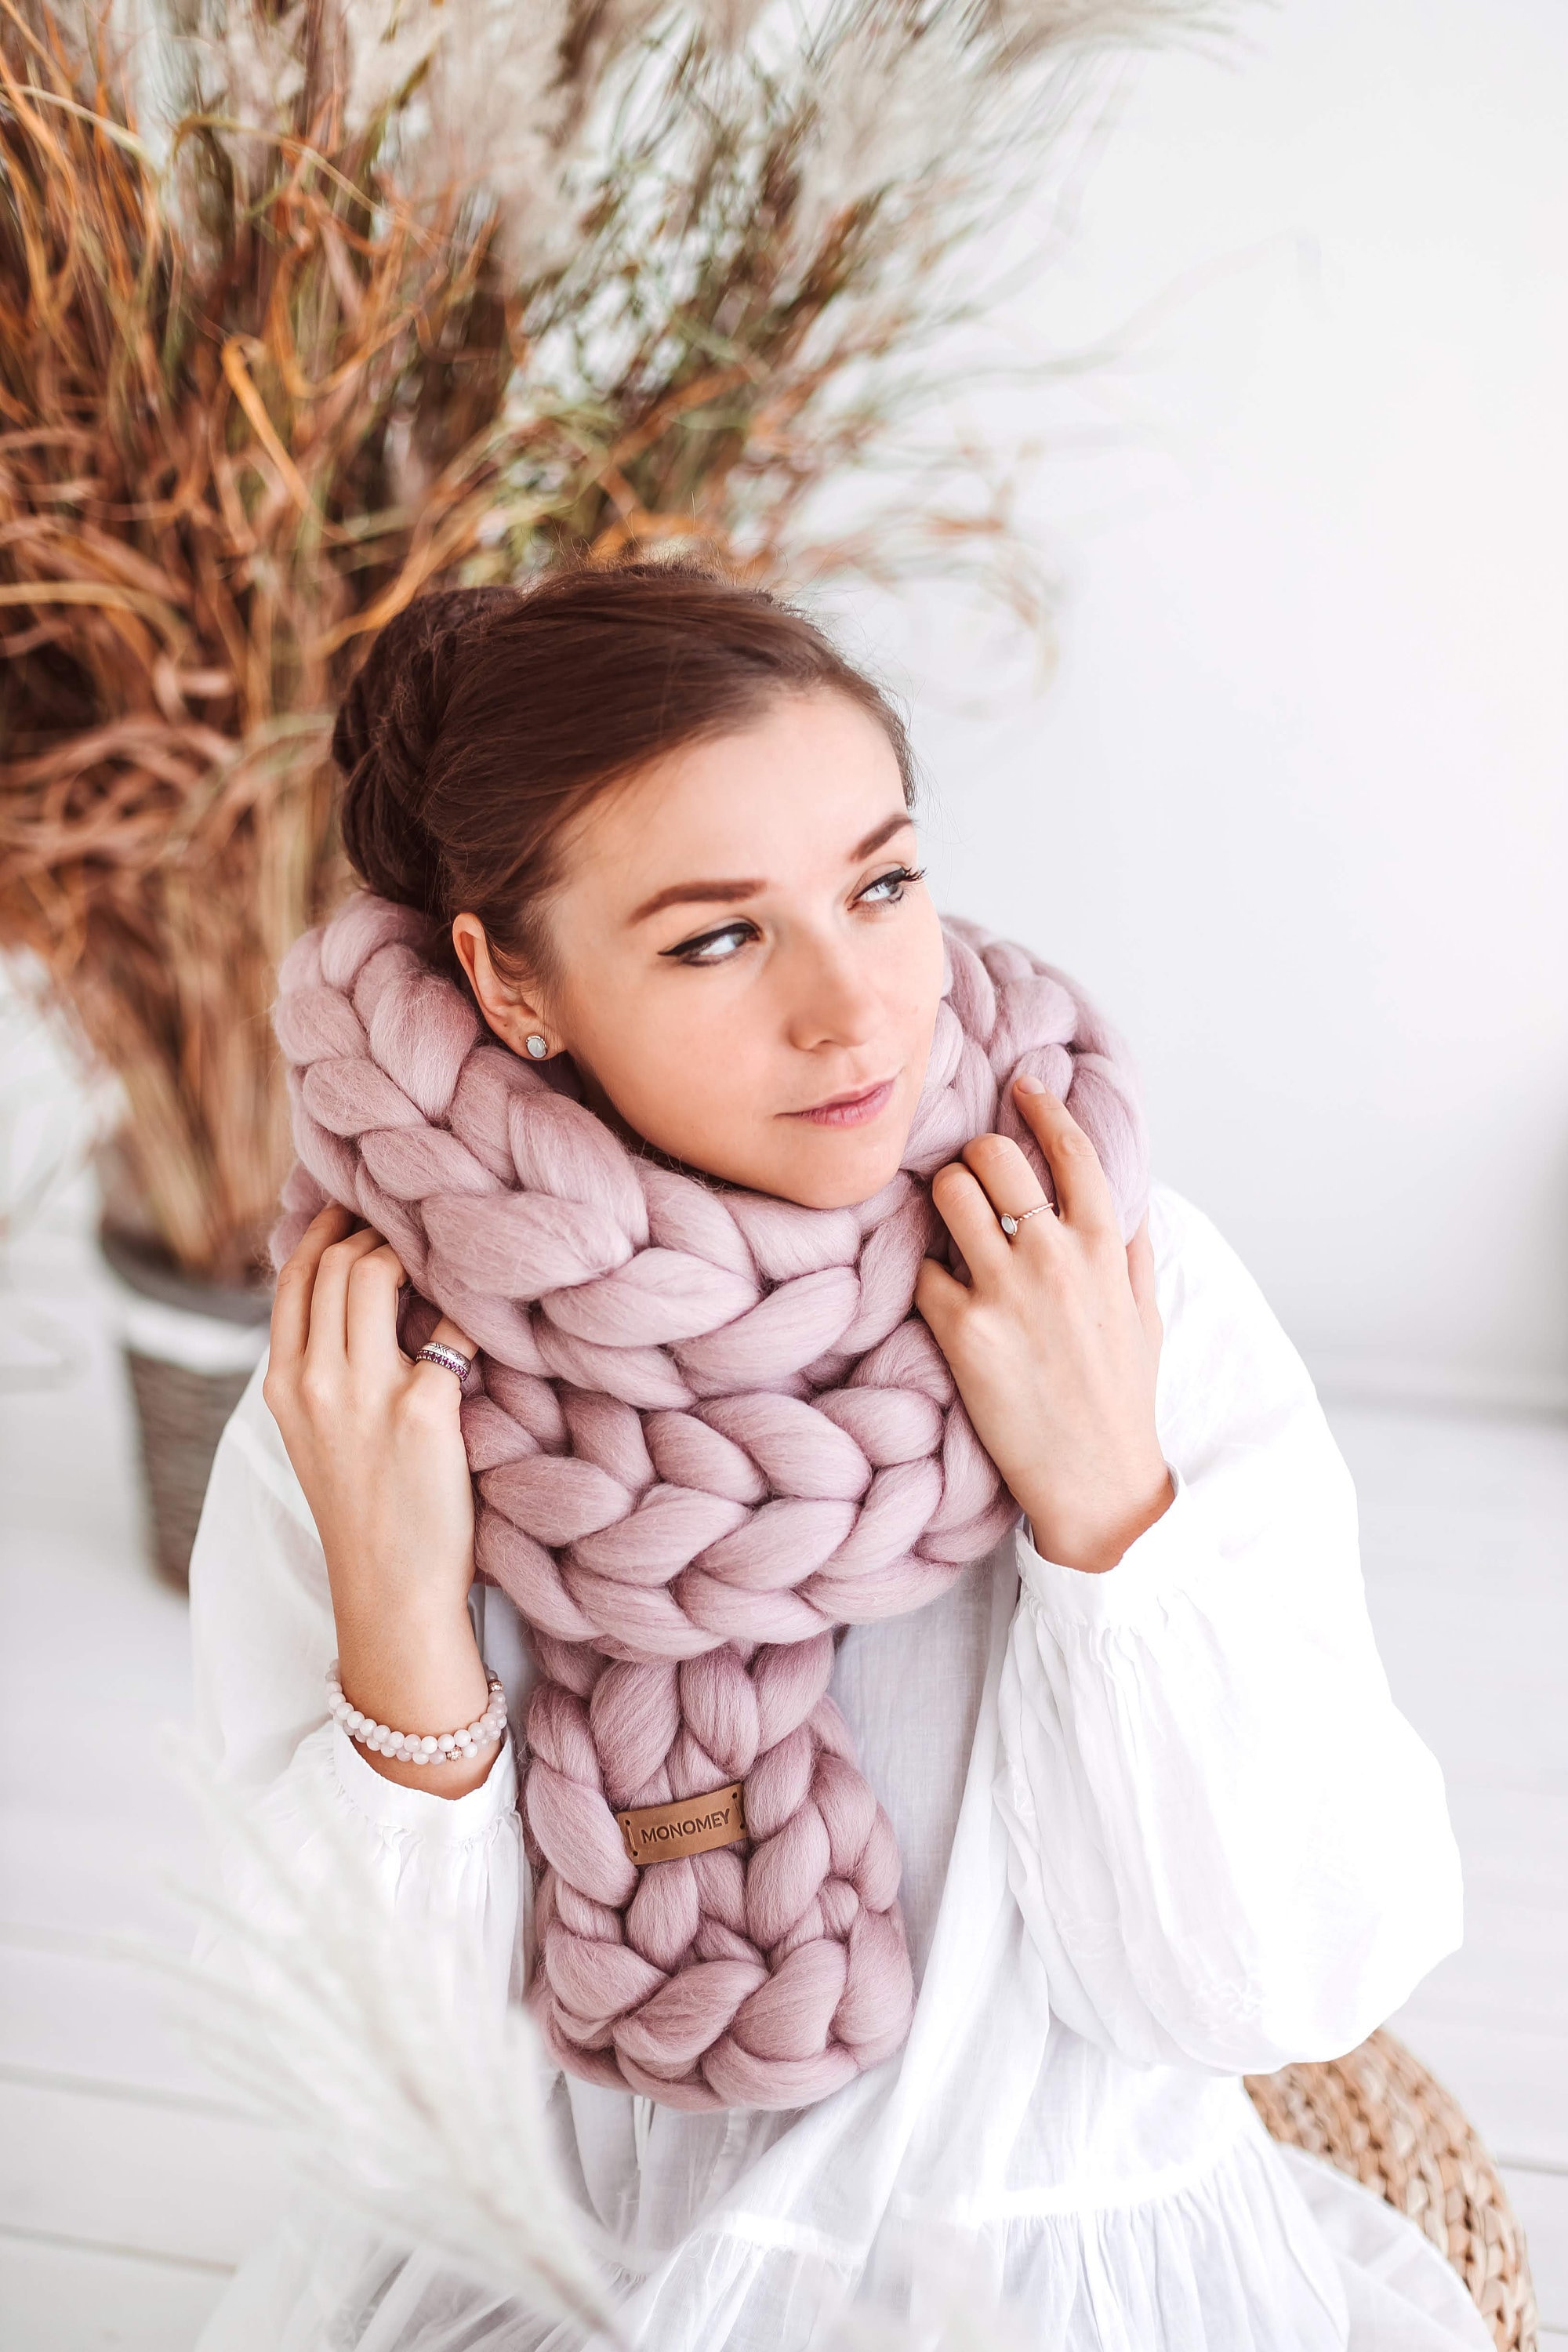 Arm Knitted Chunky Scarf, Winter Scarf, Chunky Scarf, Knitted